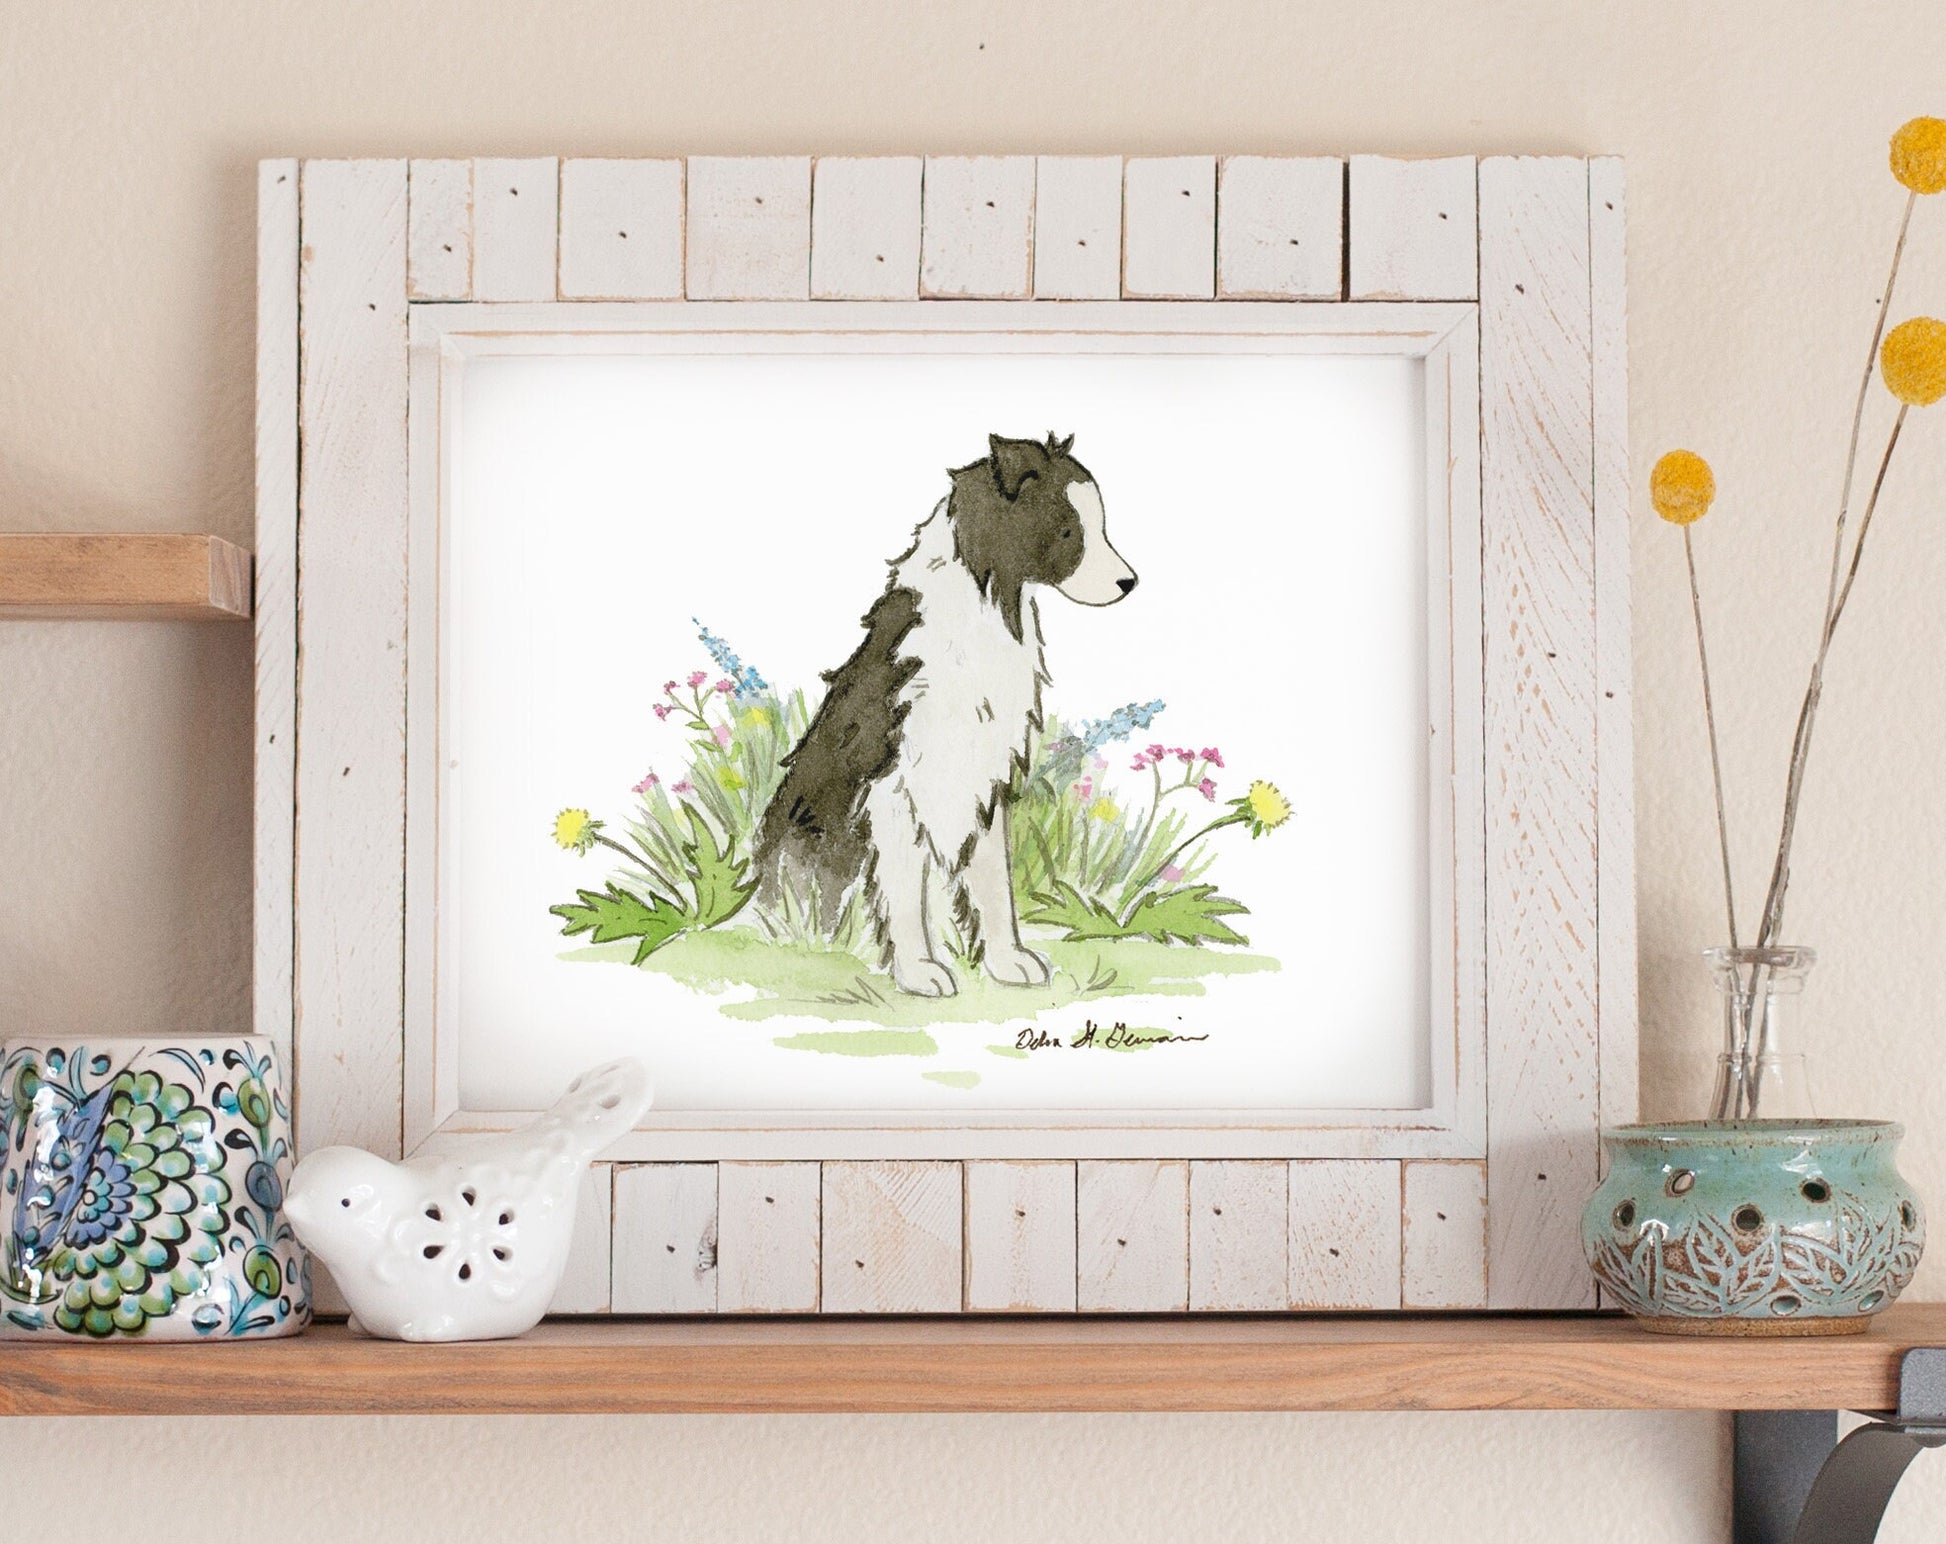 Adorable Border Collie Puppy in Basket With Toys Watercolor Canvas Print  Ready to Hang Multiple Sizes Available 